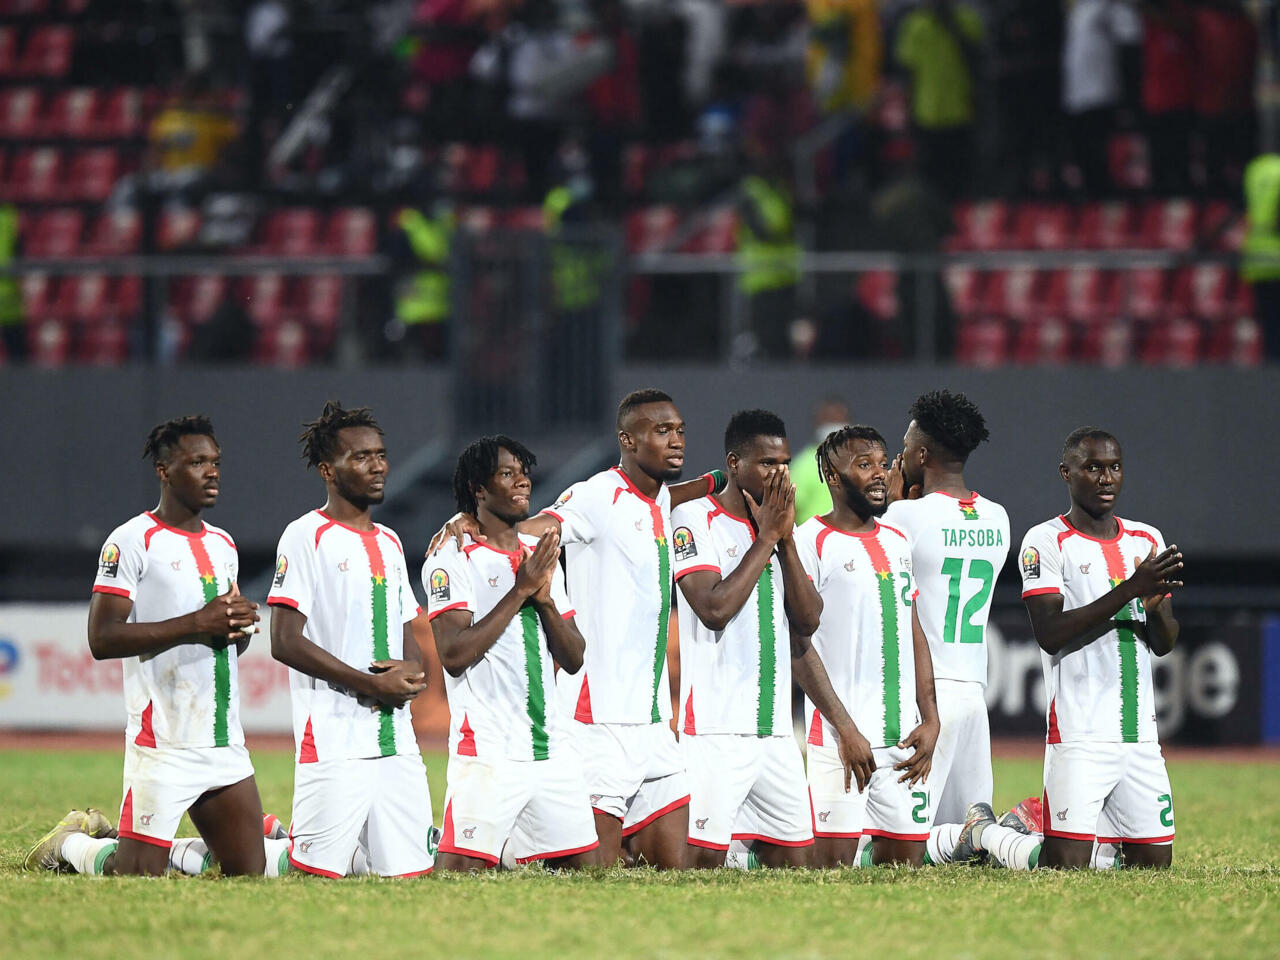 Burkina Faso's players react before their winning shot in a penalty shoot-out  during the Africa Cup of Nations (CAN) 2021 round of 16 football match between Burkina Faso and Gabon at Limbe Omnisport Stadium in Limbe on January 23, 2022. (Photo by CHARLY TRIBALLEAU / AFP)